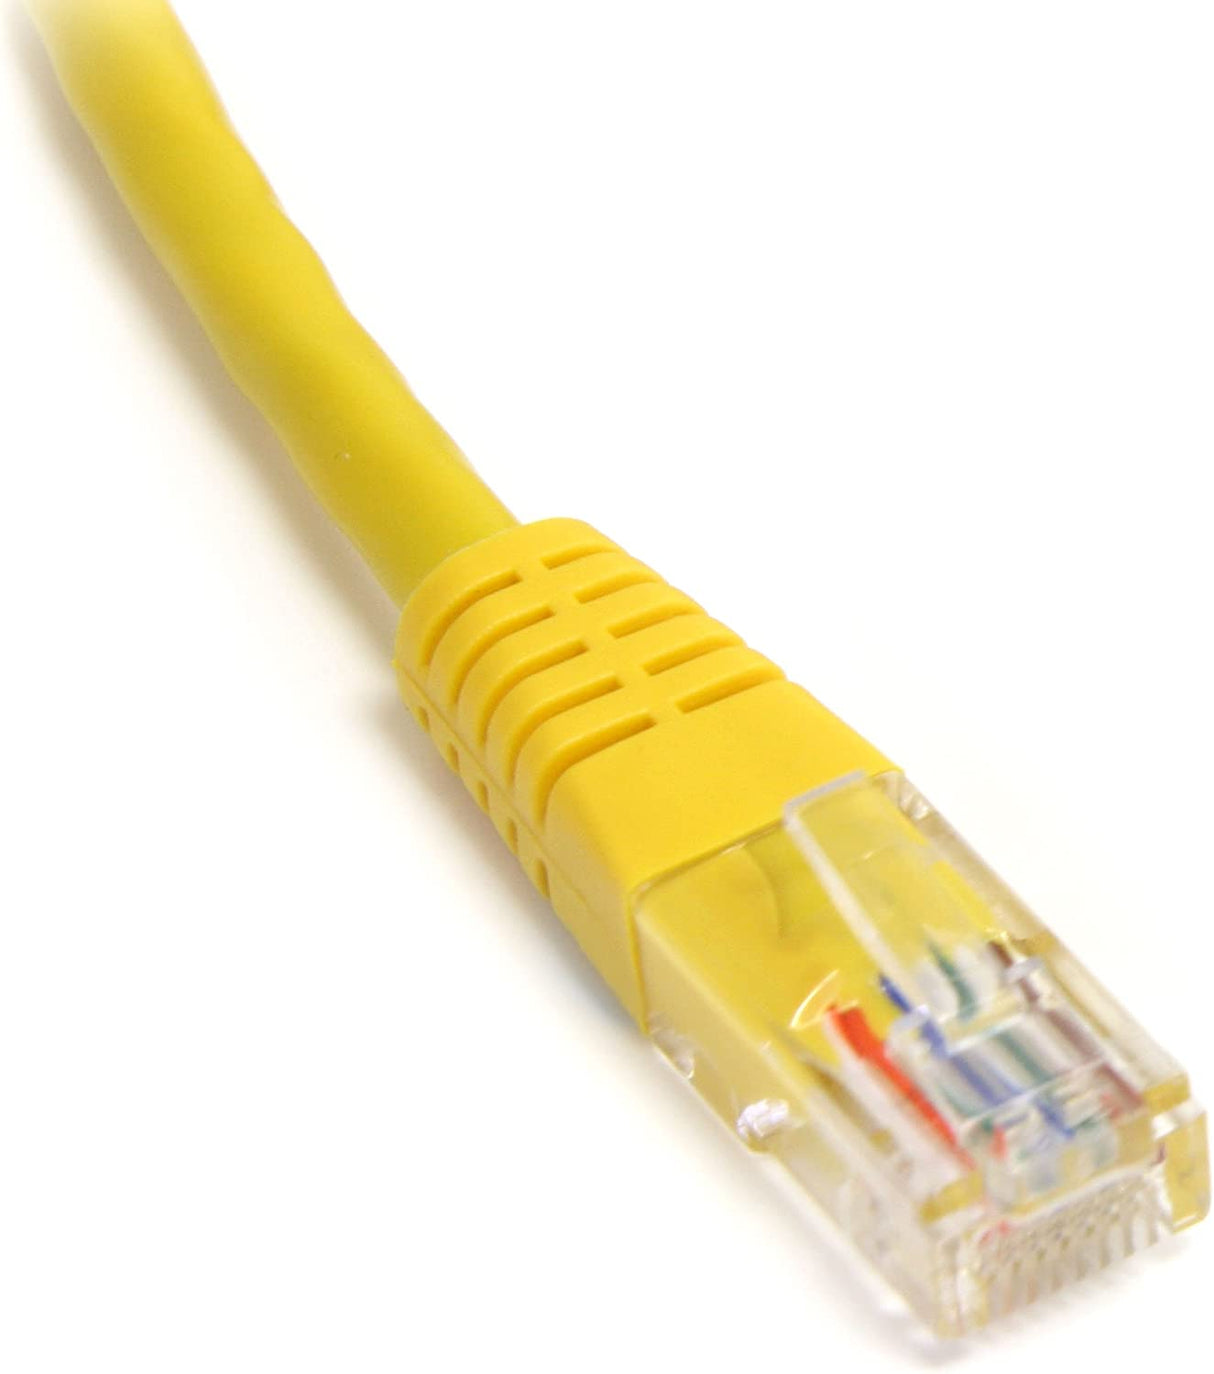 StarTech.com 15 ft Cat5e Patch Cable with Molded RJ45 Connectors - Yellow - Cat5e Ethernet Patch Cable - 15ft UTP Cat 5e Patch Cord (M45PATCH15YL) Yellow 15 ft/4.6 m